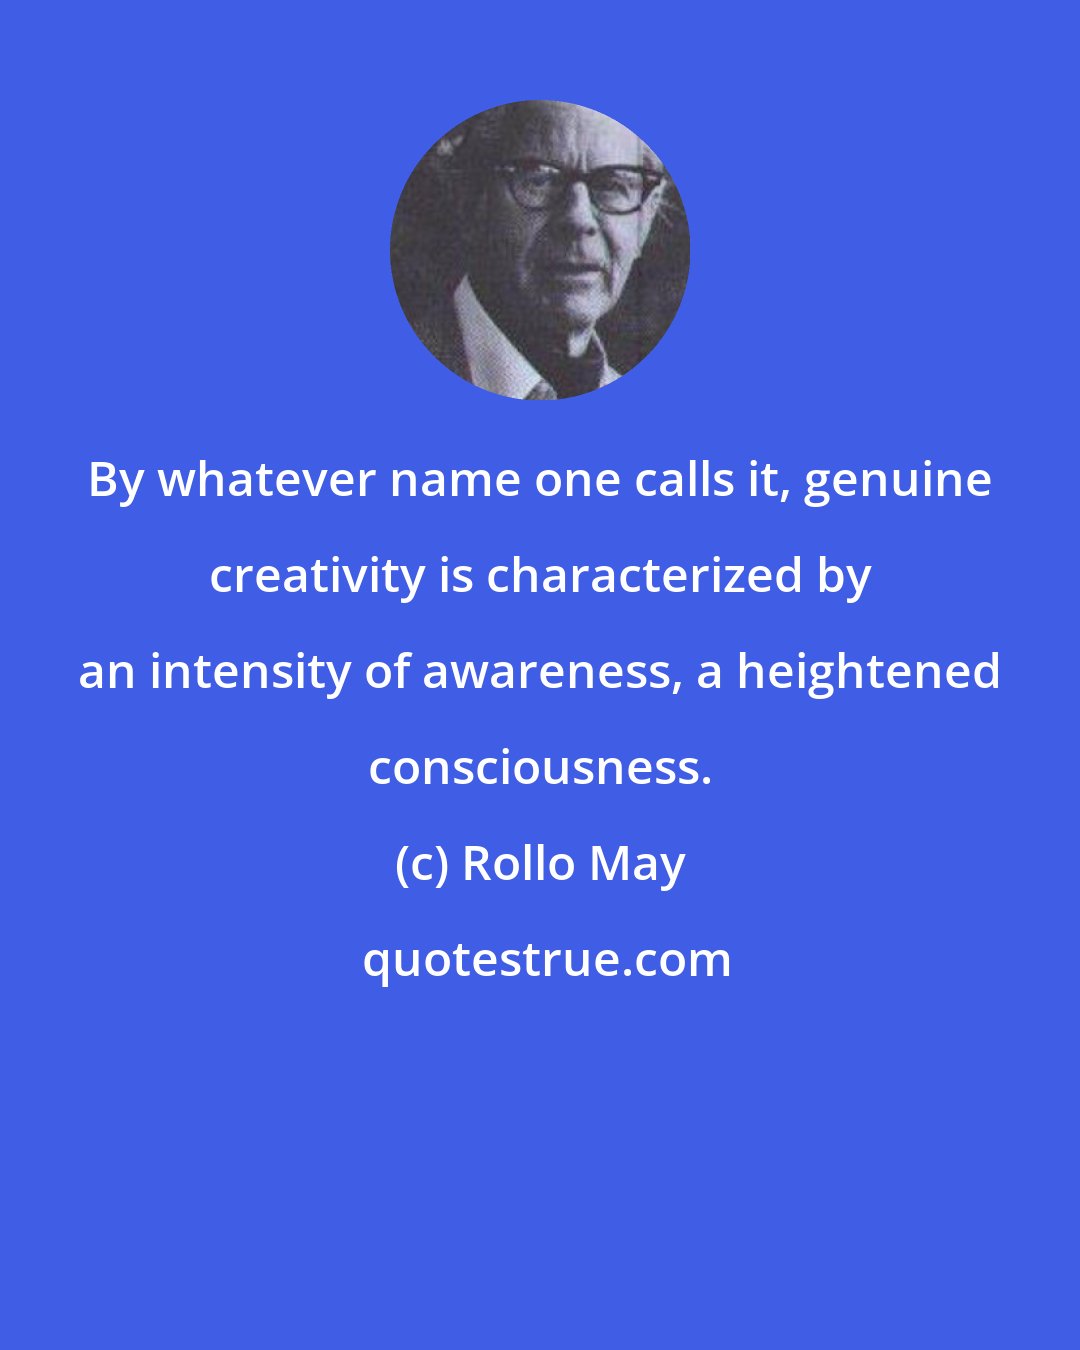 Rollo May: By whatever name one calls it, genuine creativity is characterized by an intensity of awareness, a heightened consciousness.